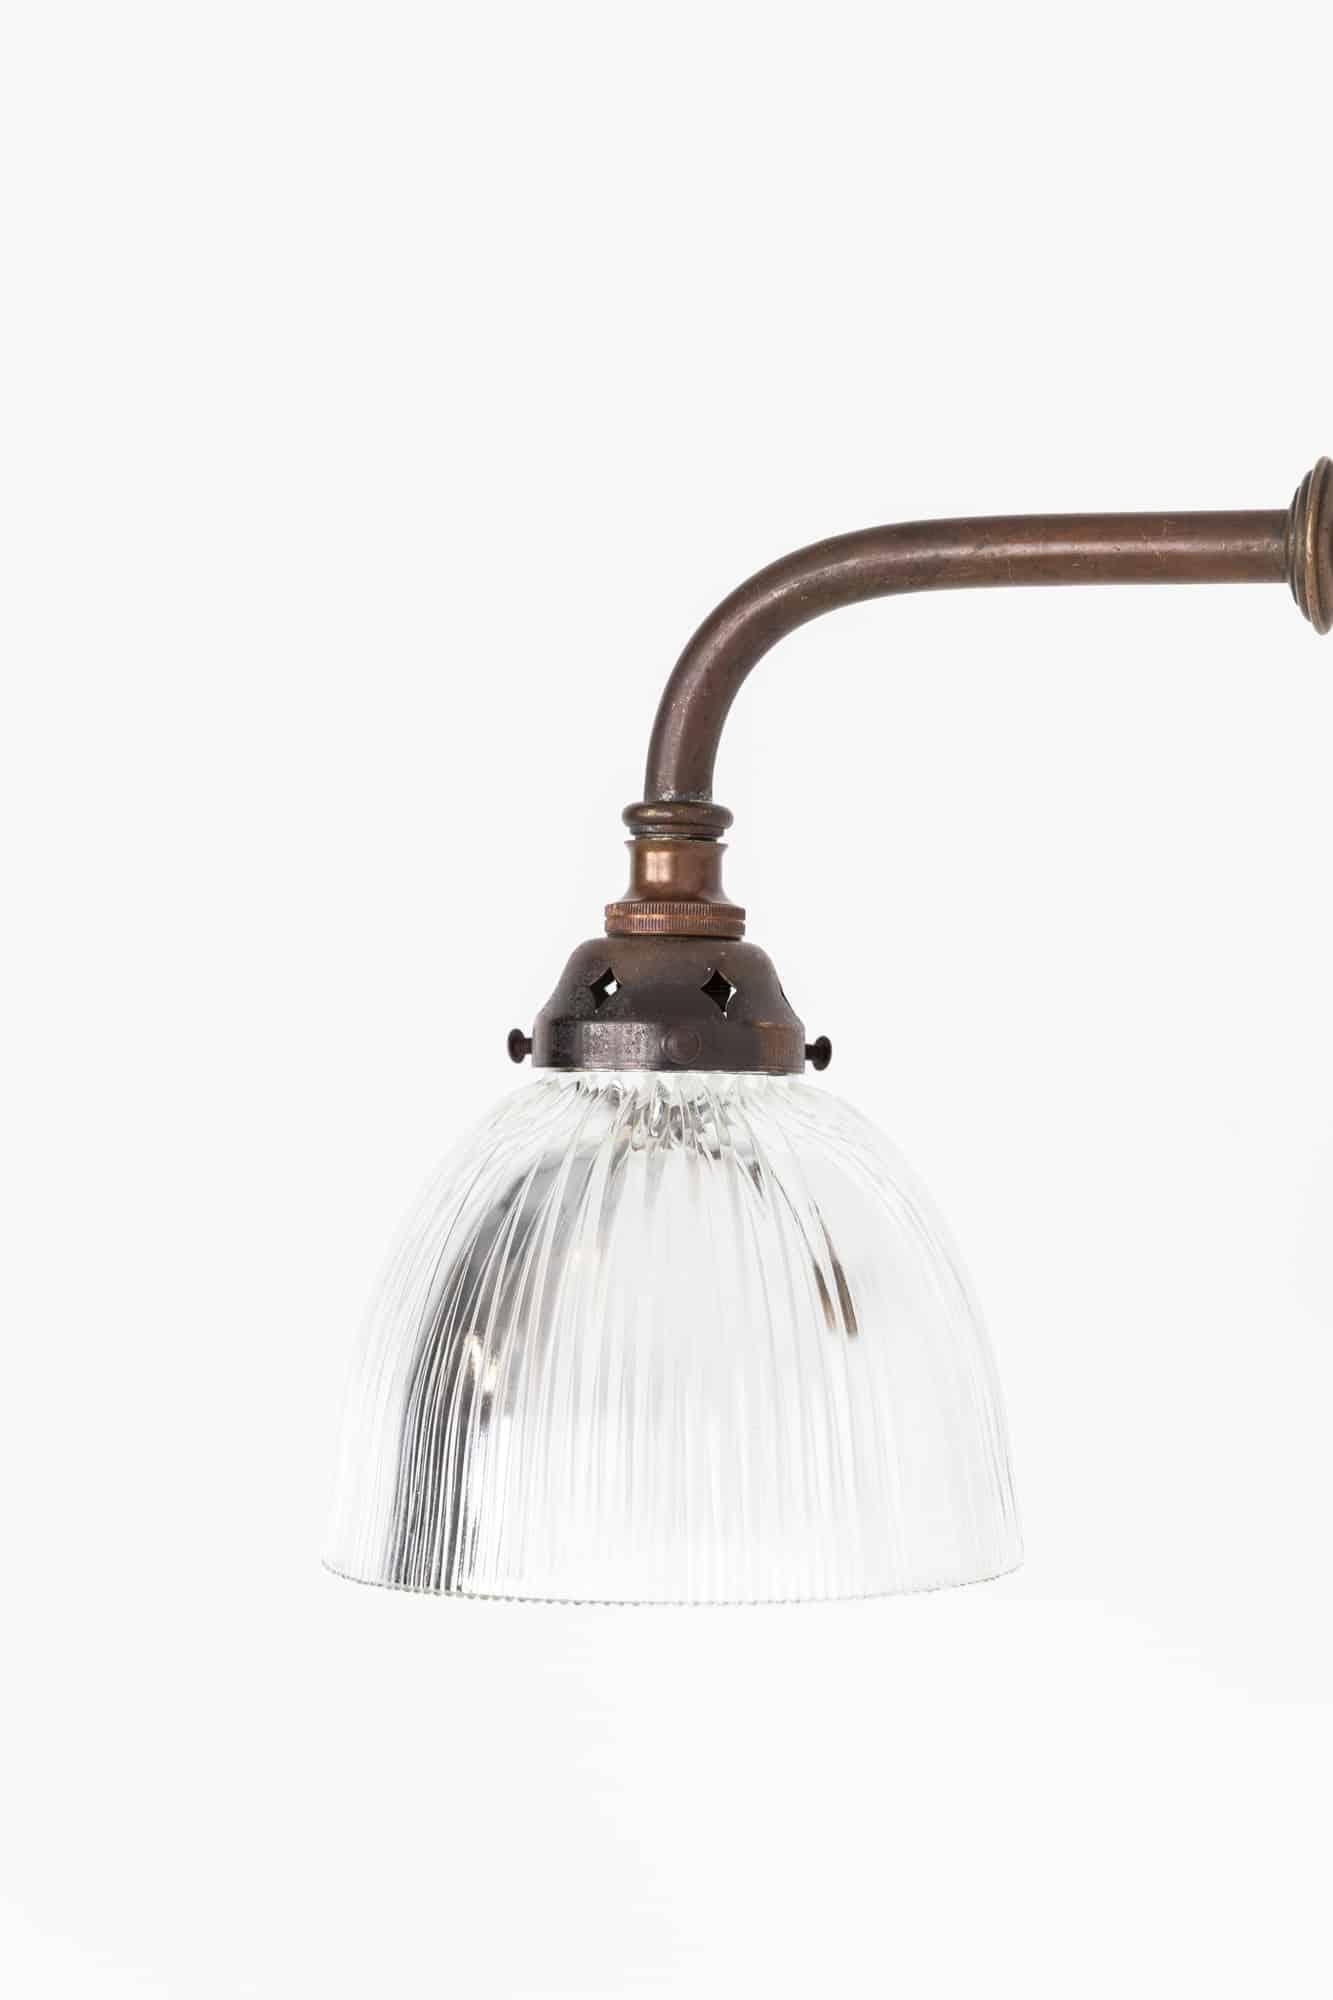 An incredibly elegant wall mounted light made in England by Holophane. c.1920

The simple prismatic glass shade made by Holophane, stamped to rim, and simple brass swan neck wall bracket with attractive patina and aging.